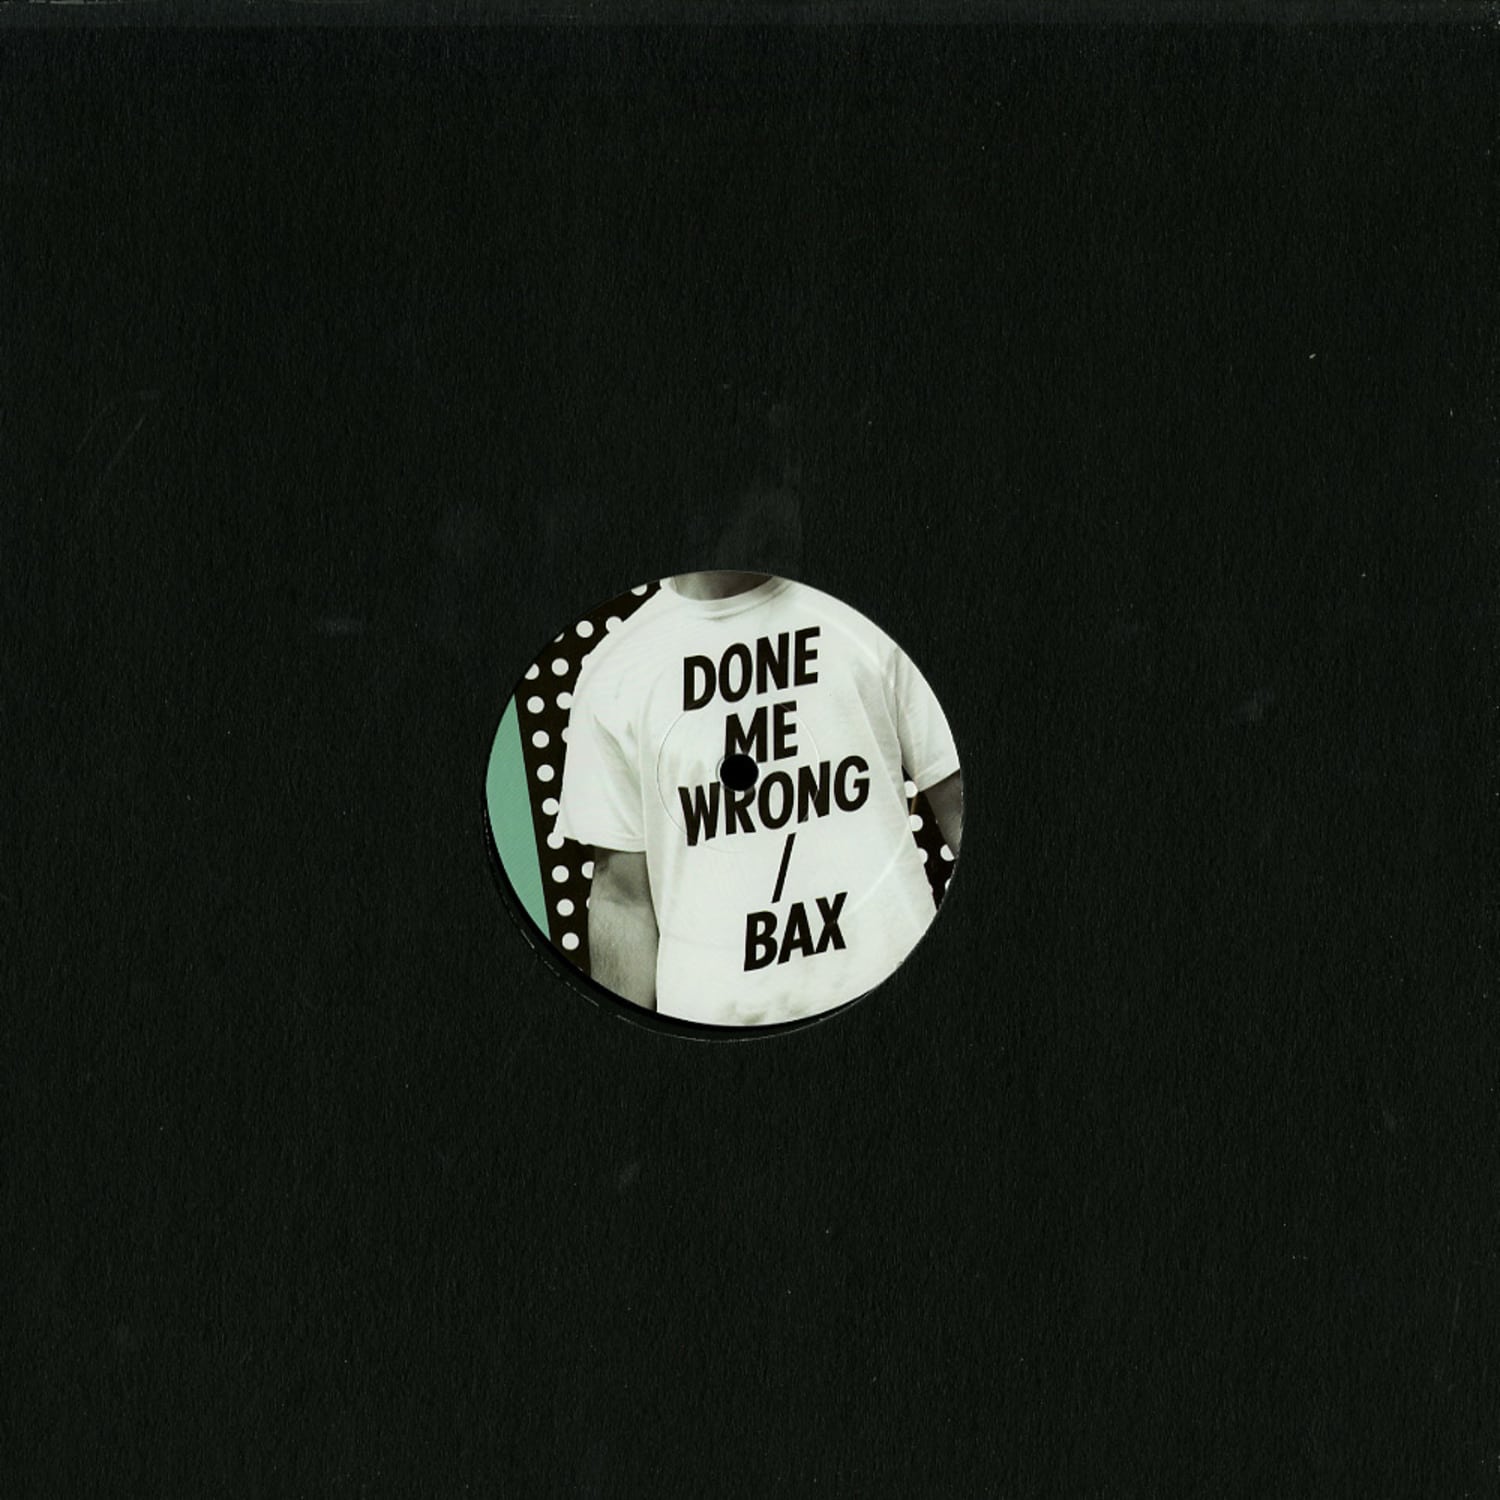 Mosca - DONE ME WRONG / BAX